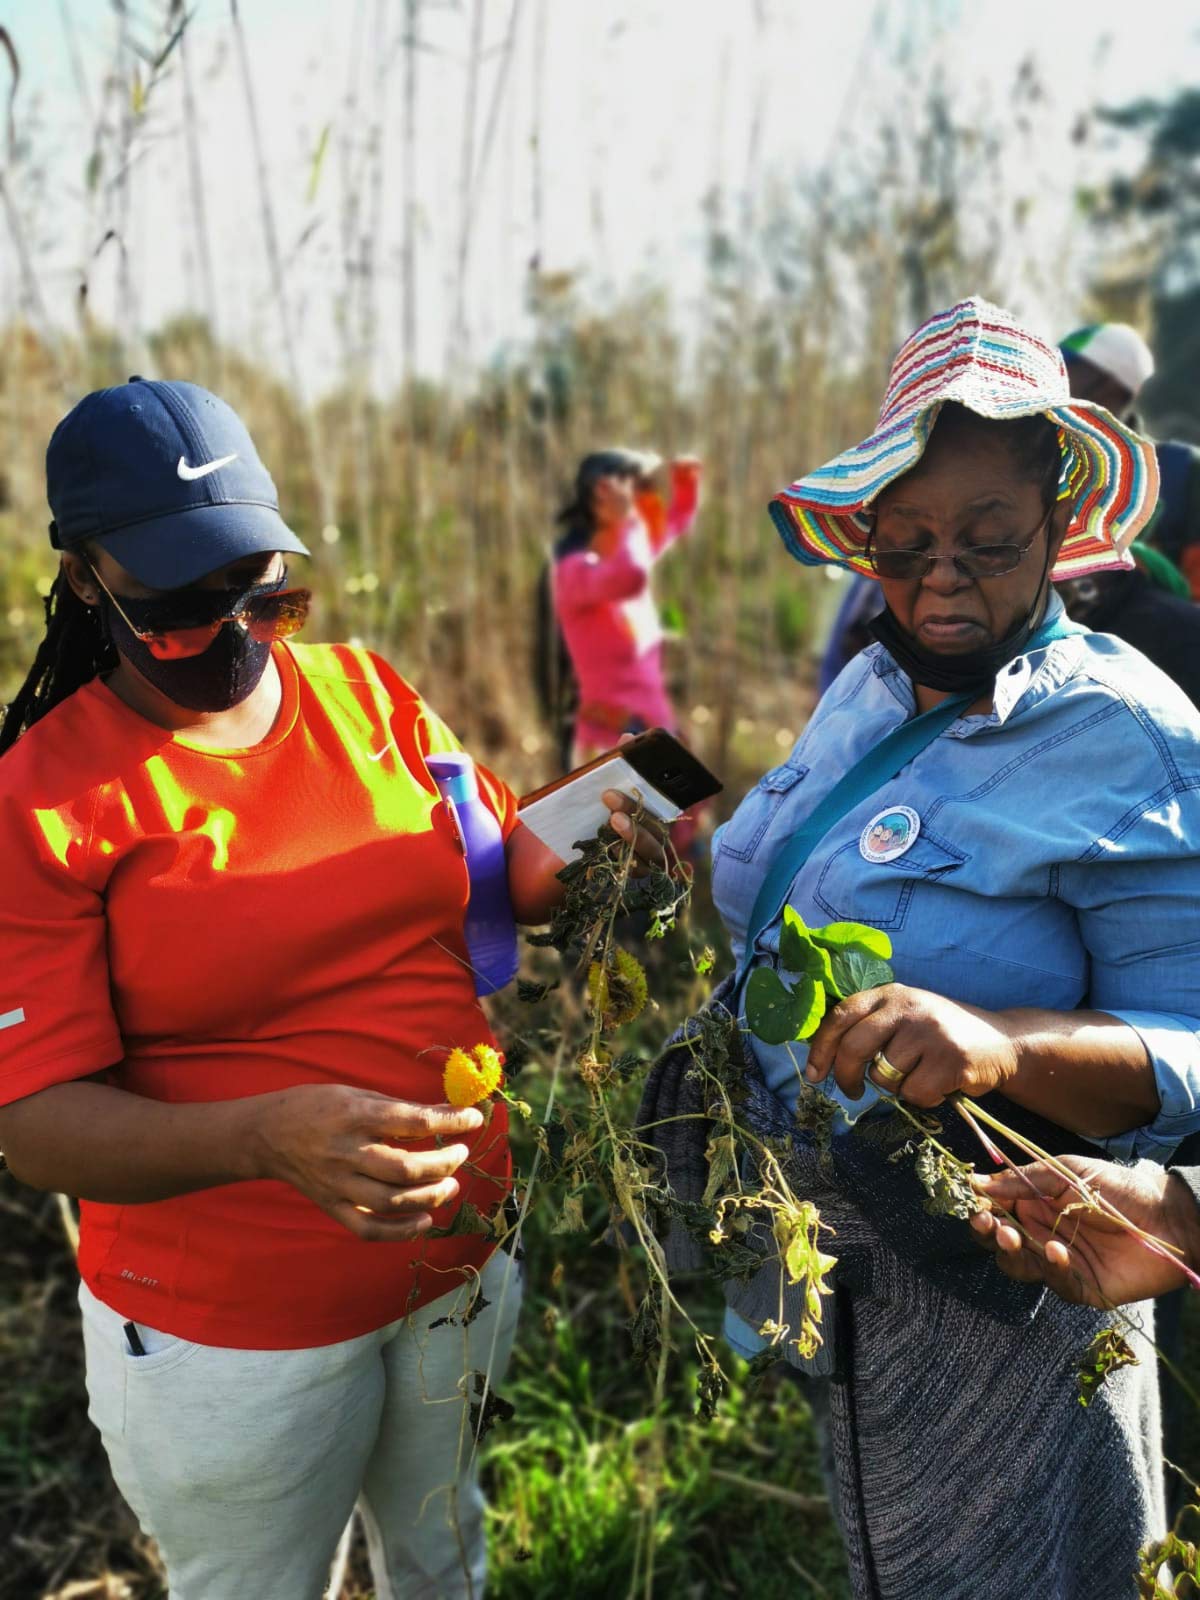 LONG LIFE: Teachers Phumzile Manana and Zandile Mdletshe harvesting Gotu Kola. Dubbed the herb of longevity, it has many uses including as an anti-inflammatory, to improve circulation and for skin and hair care.